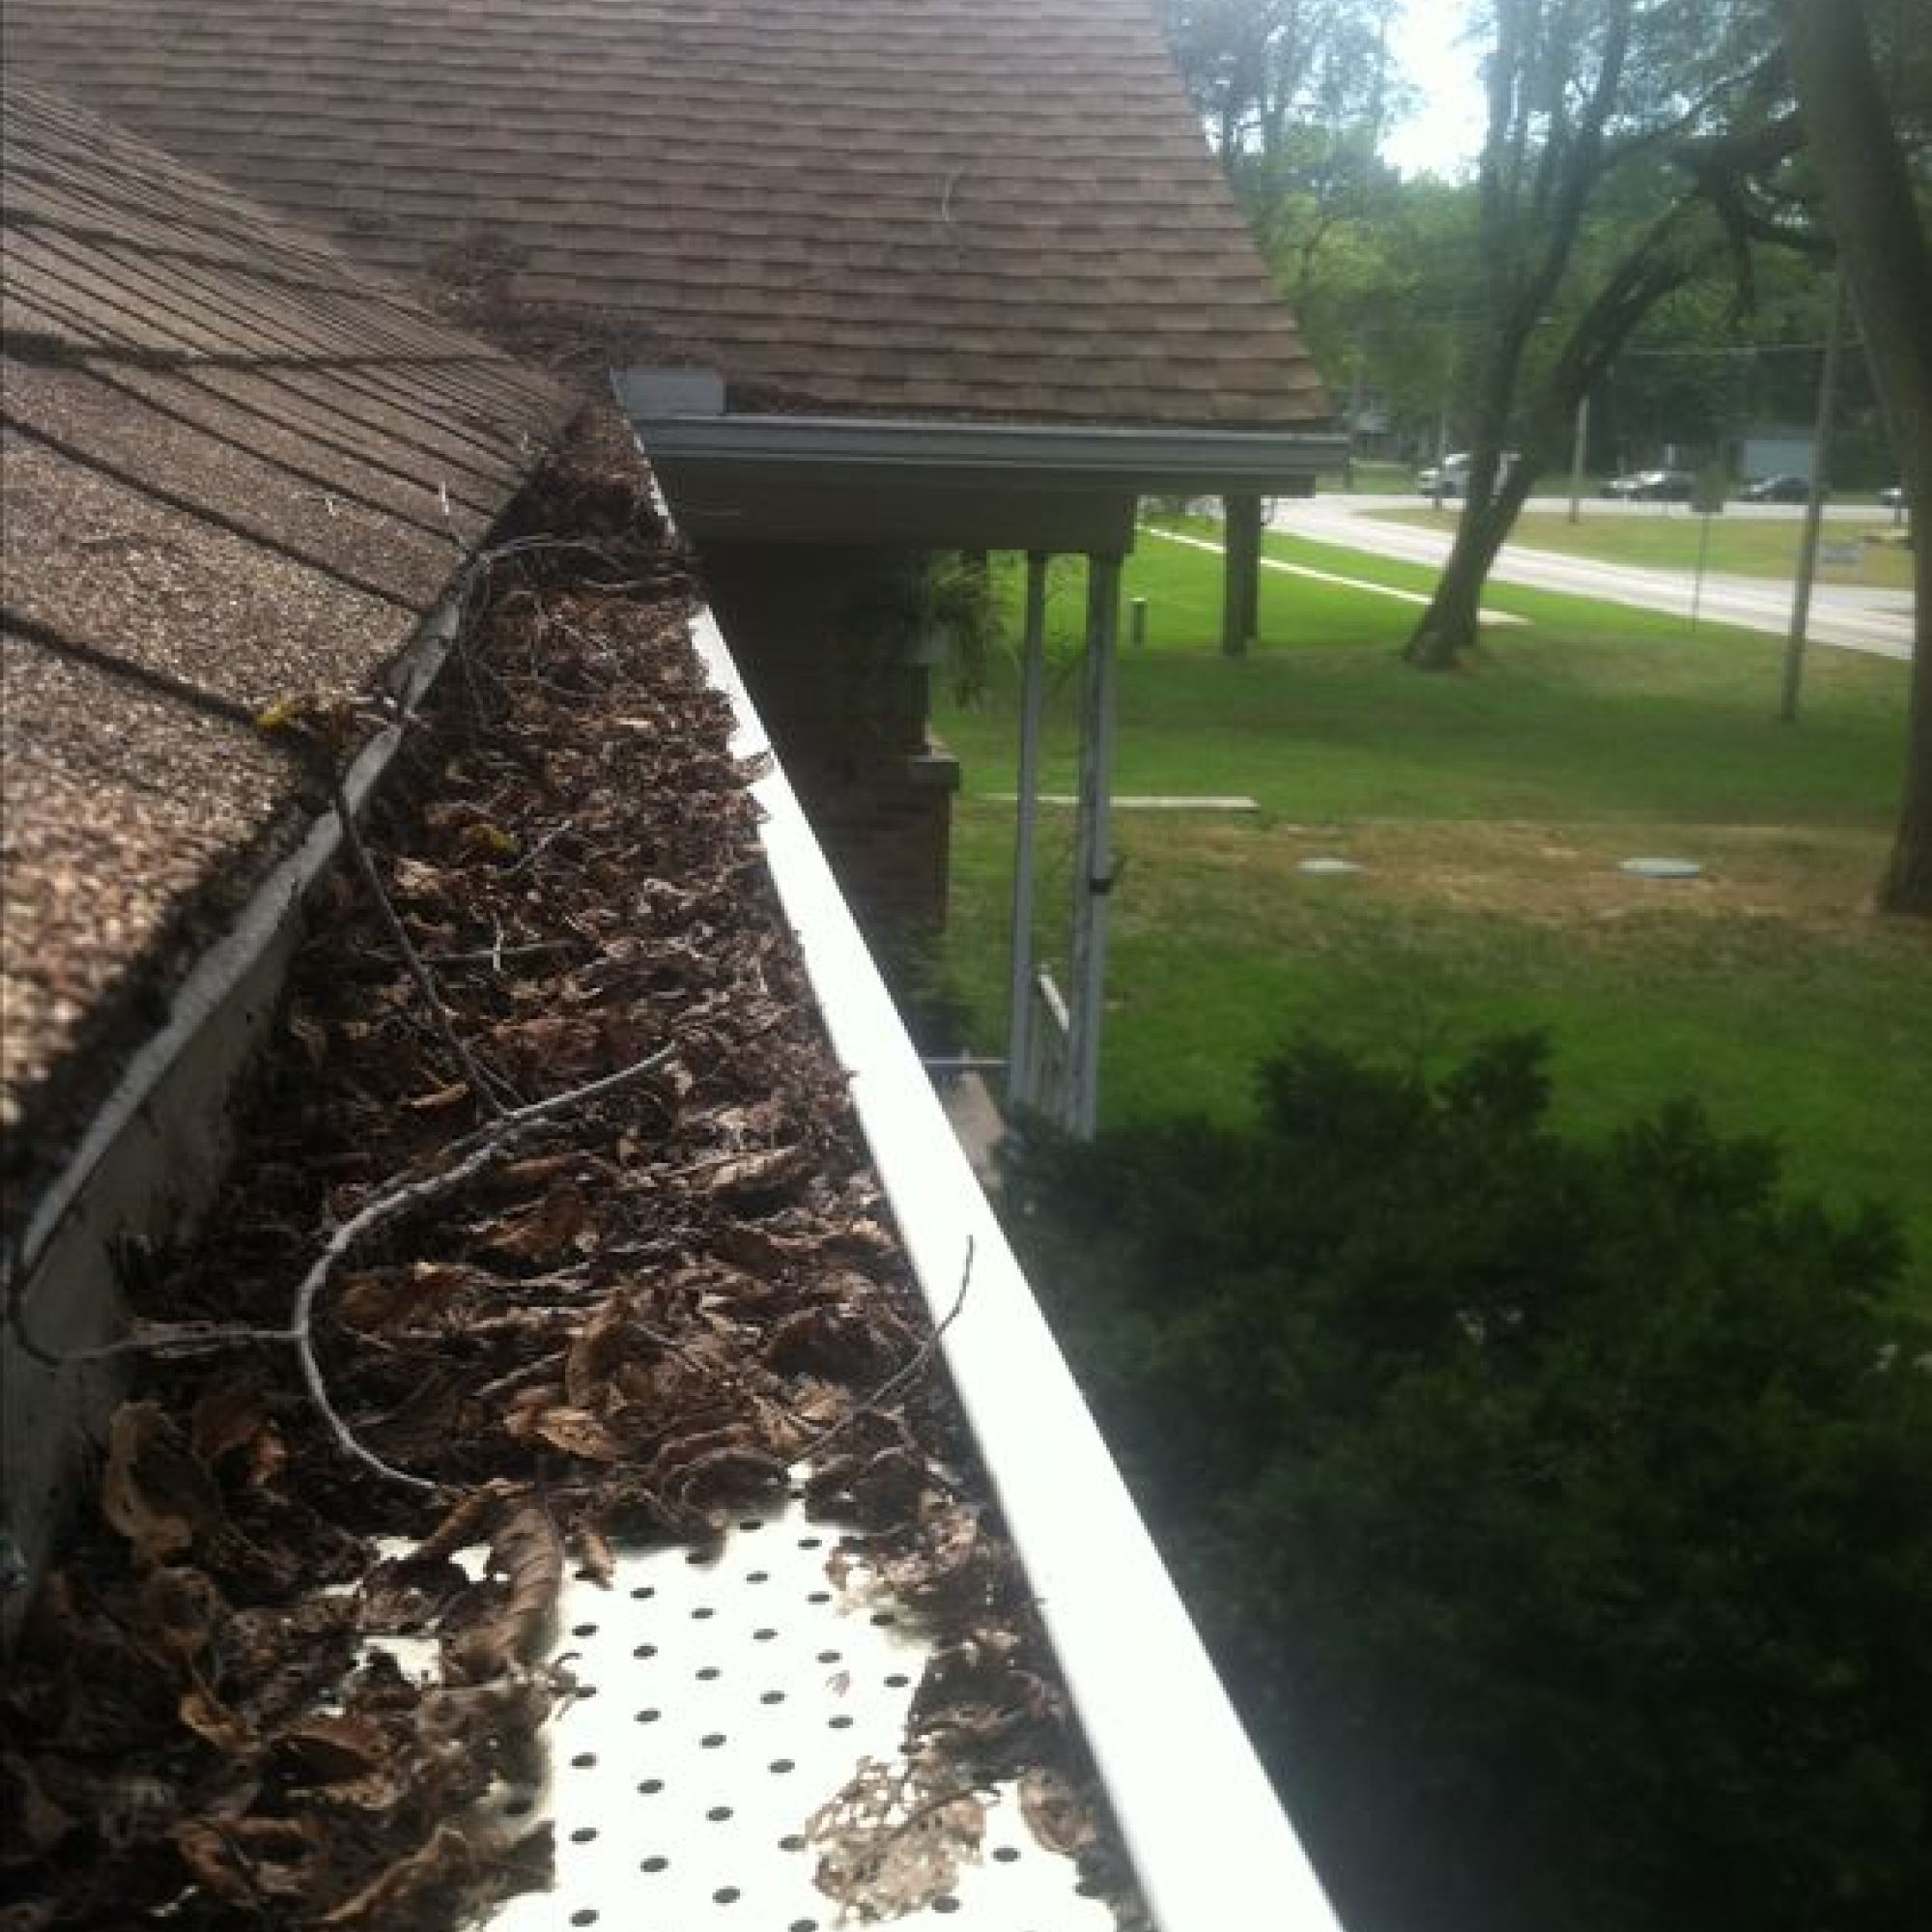 Aluminum gutter guard covered with leaves